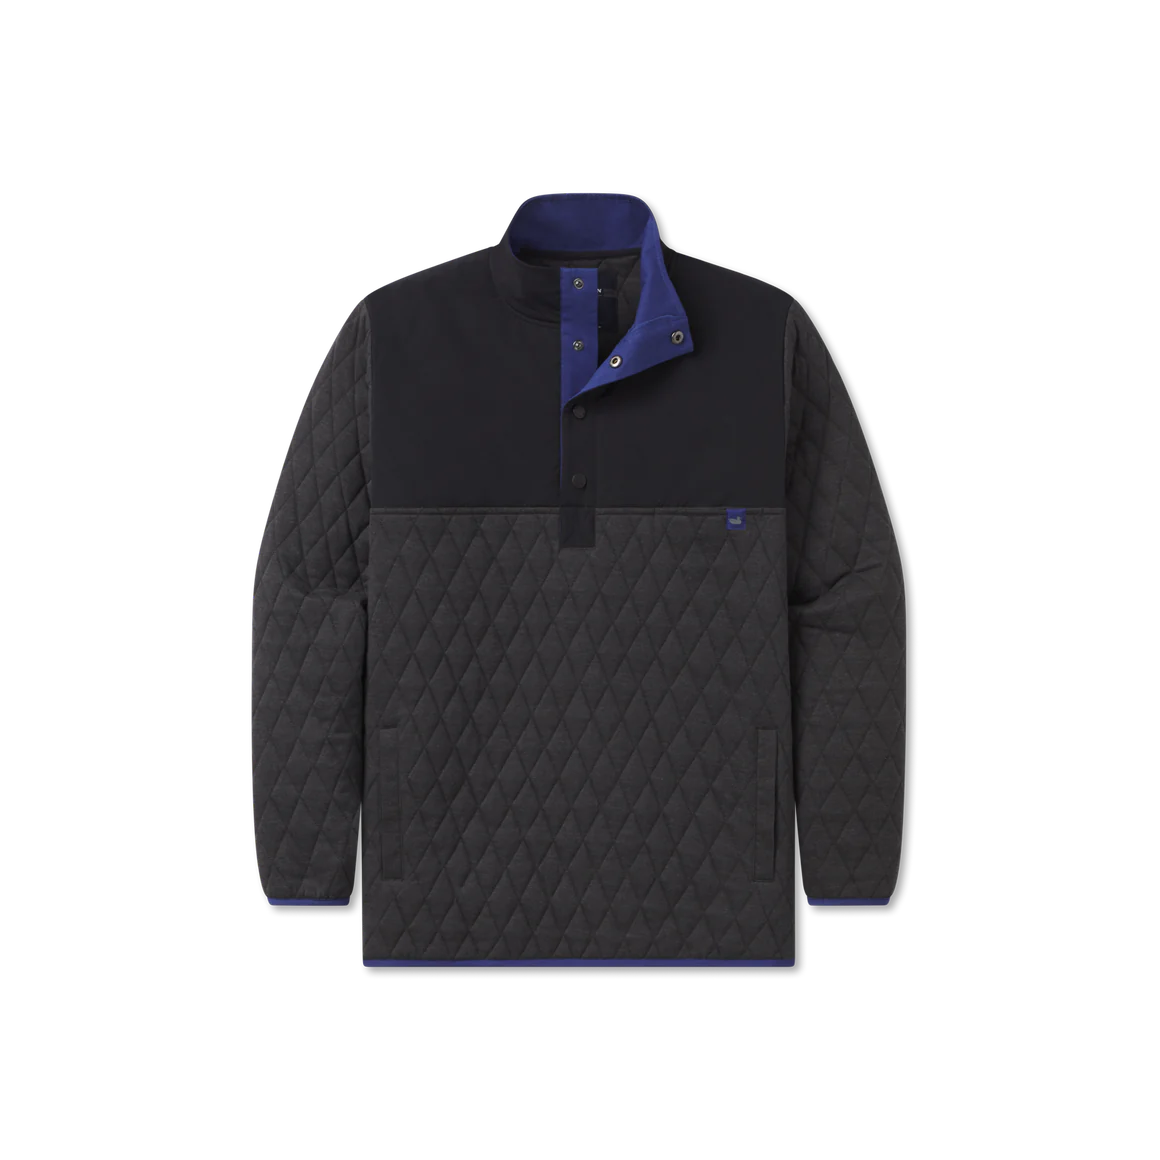 Southern Marsh Bighorn Quilted Pullover